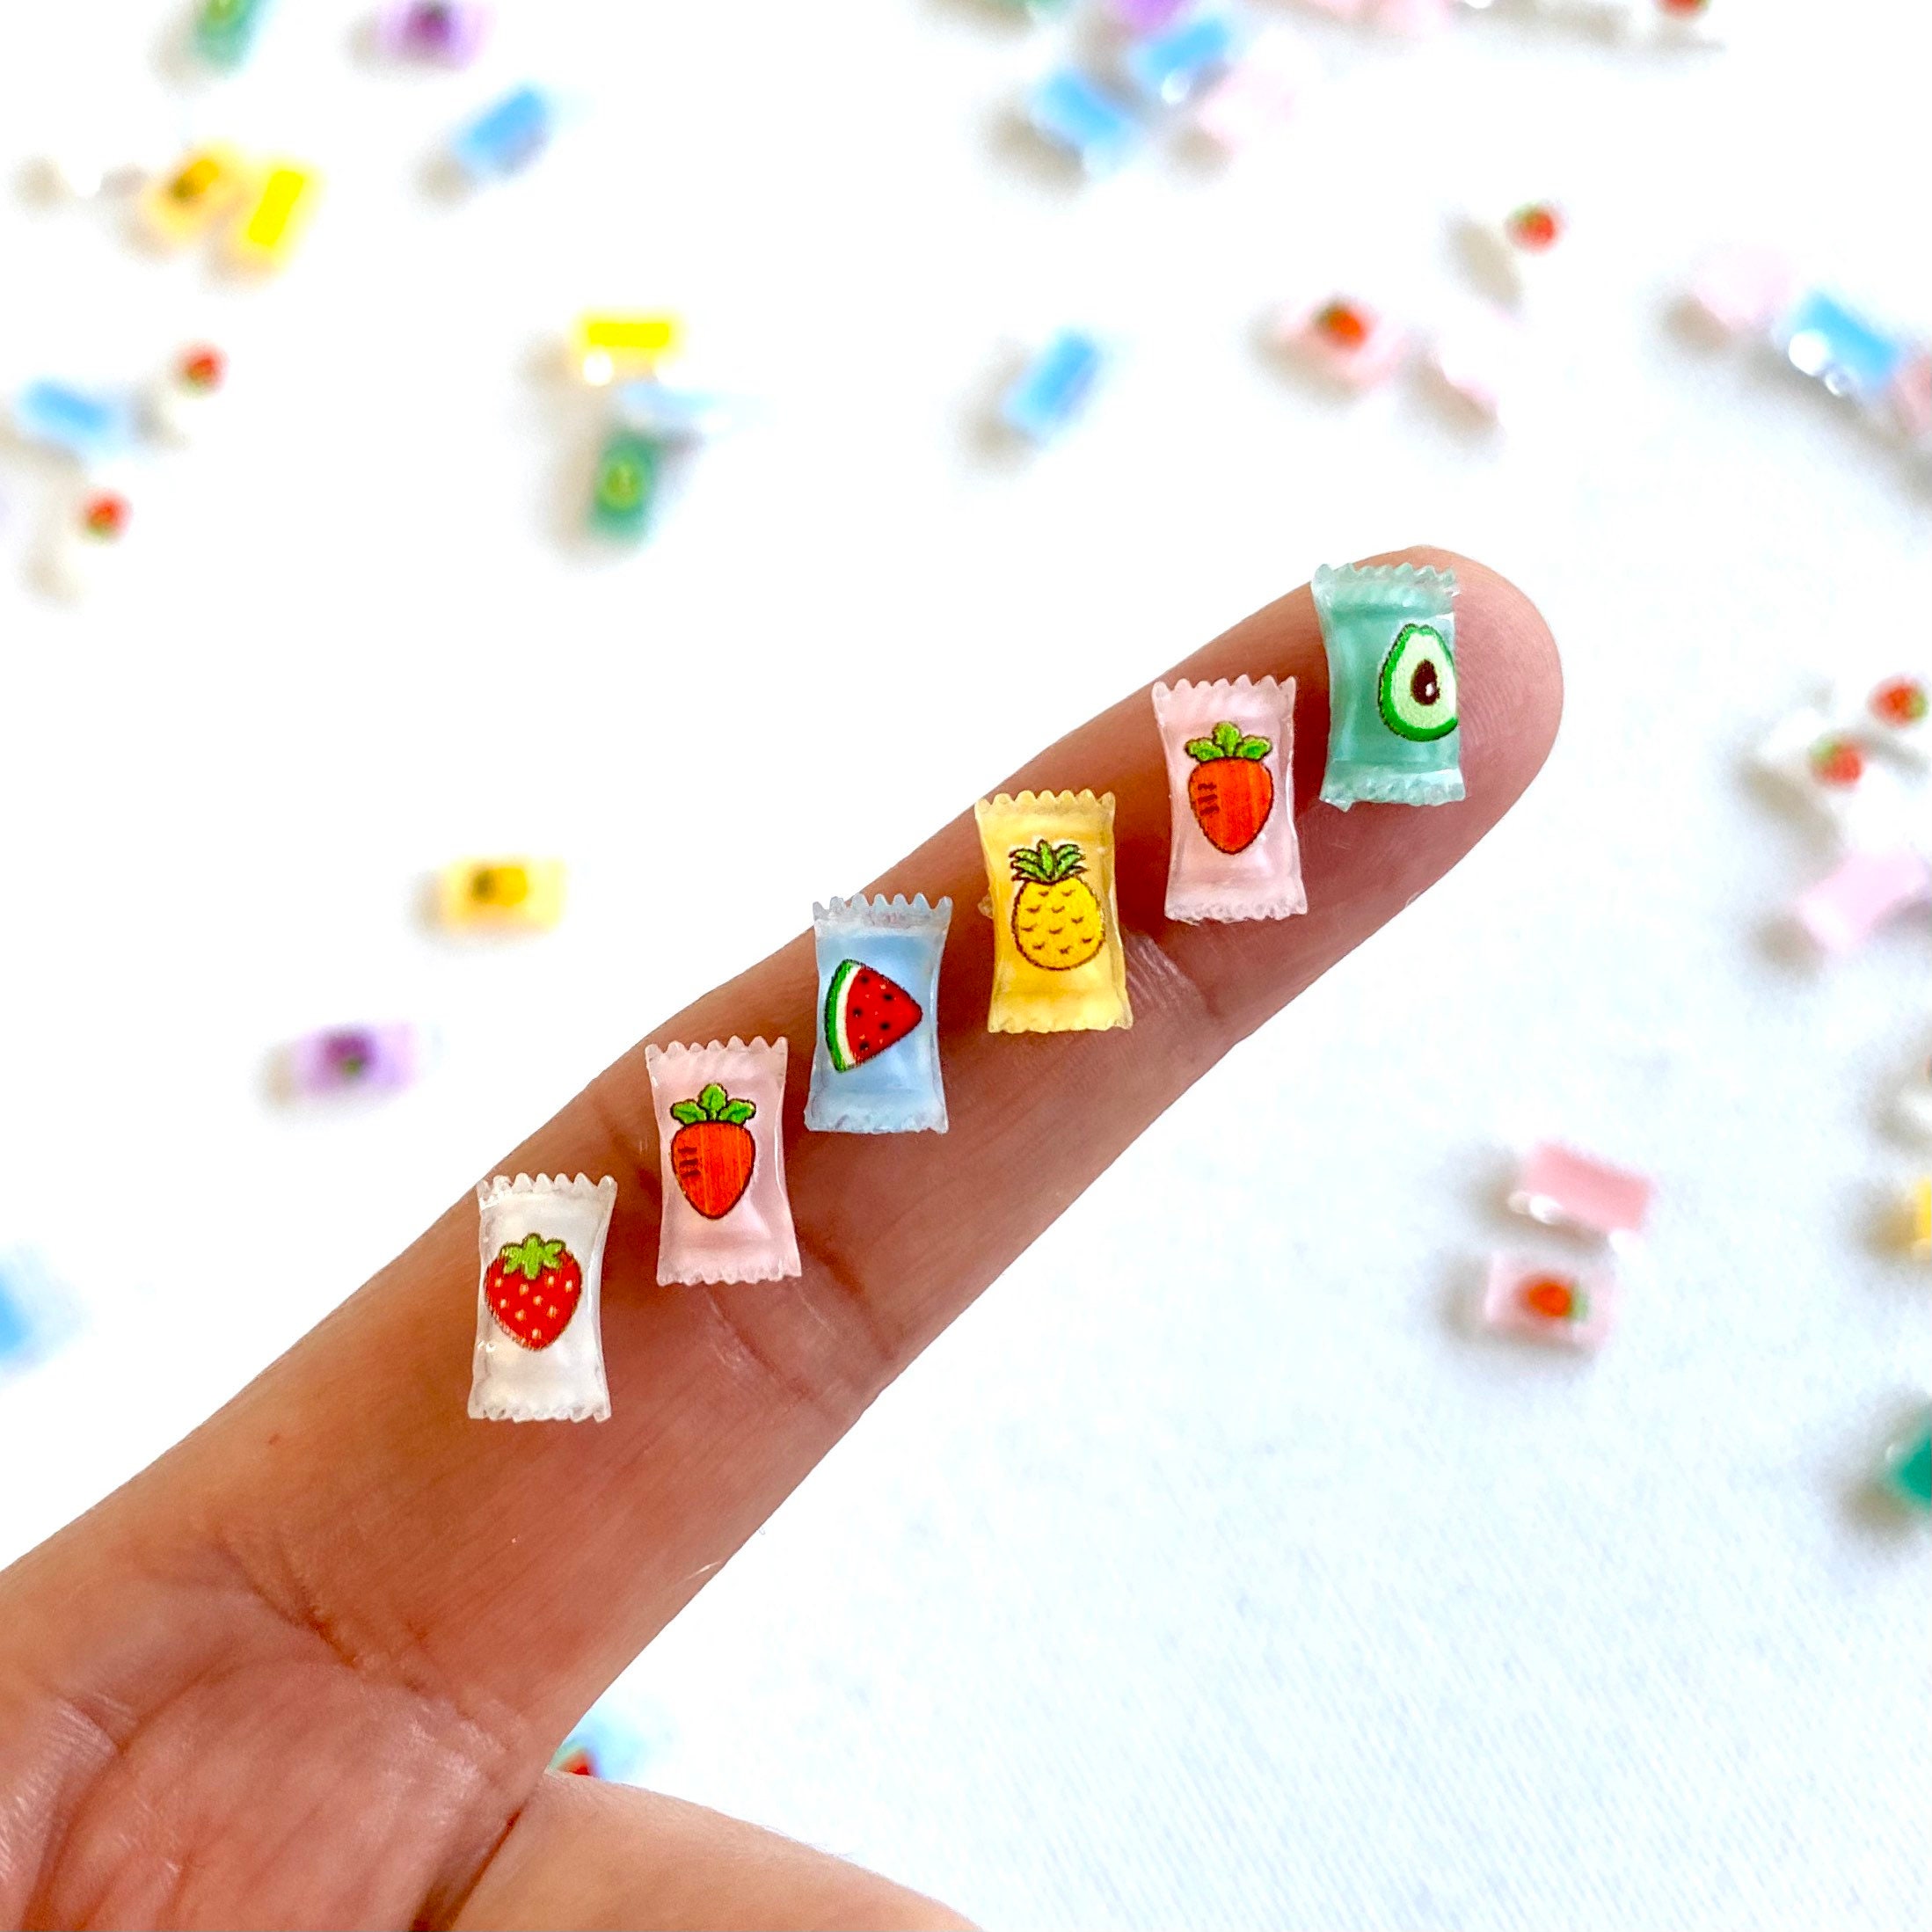 8 Tiny Sweets Candy Cabochons for Nail Decoration, Resin Embellishment,  Shaker Molds, Cute Multicolor Miniature Sweets, 06 